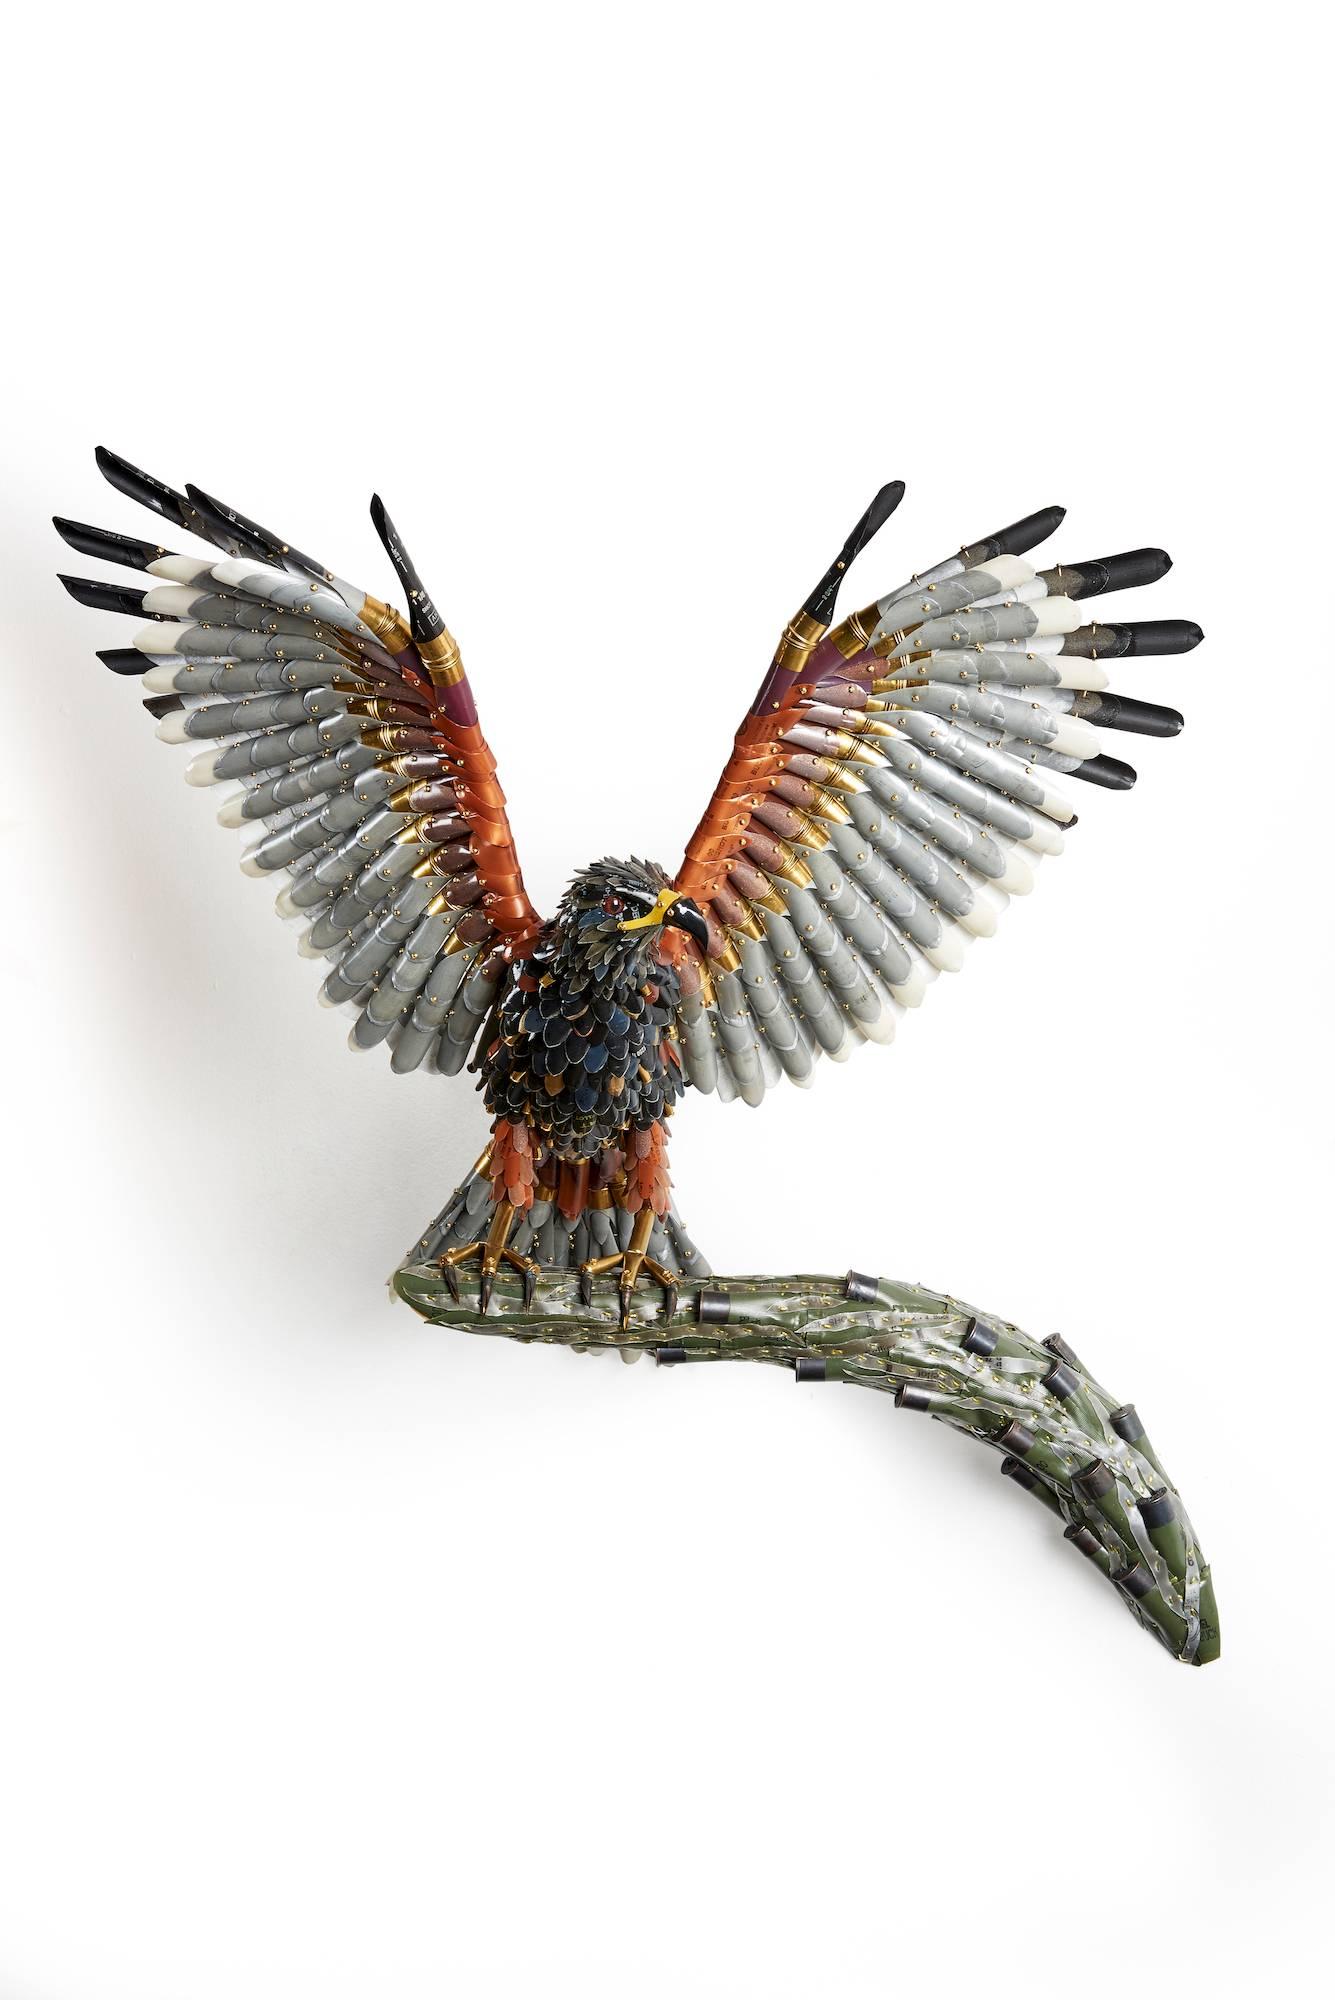 Falcon I - Sculpture by Federico Uribe